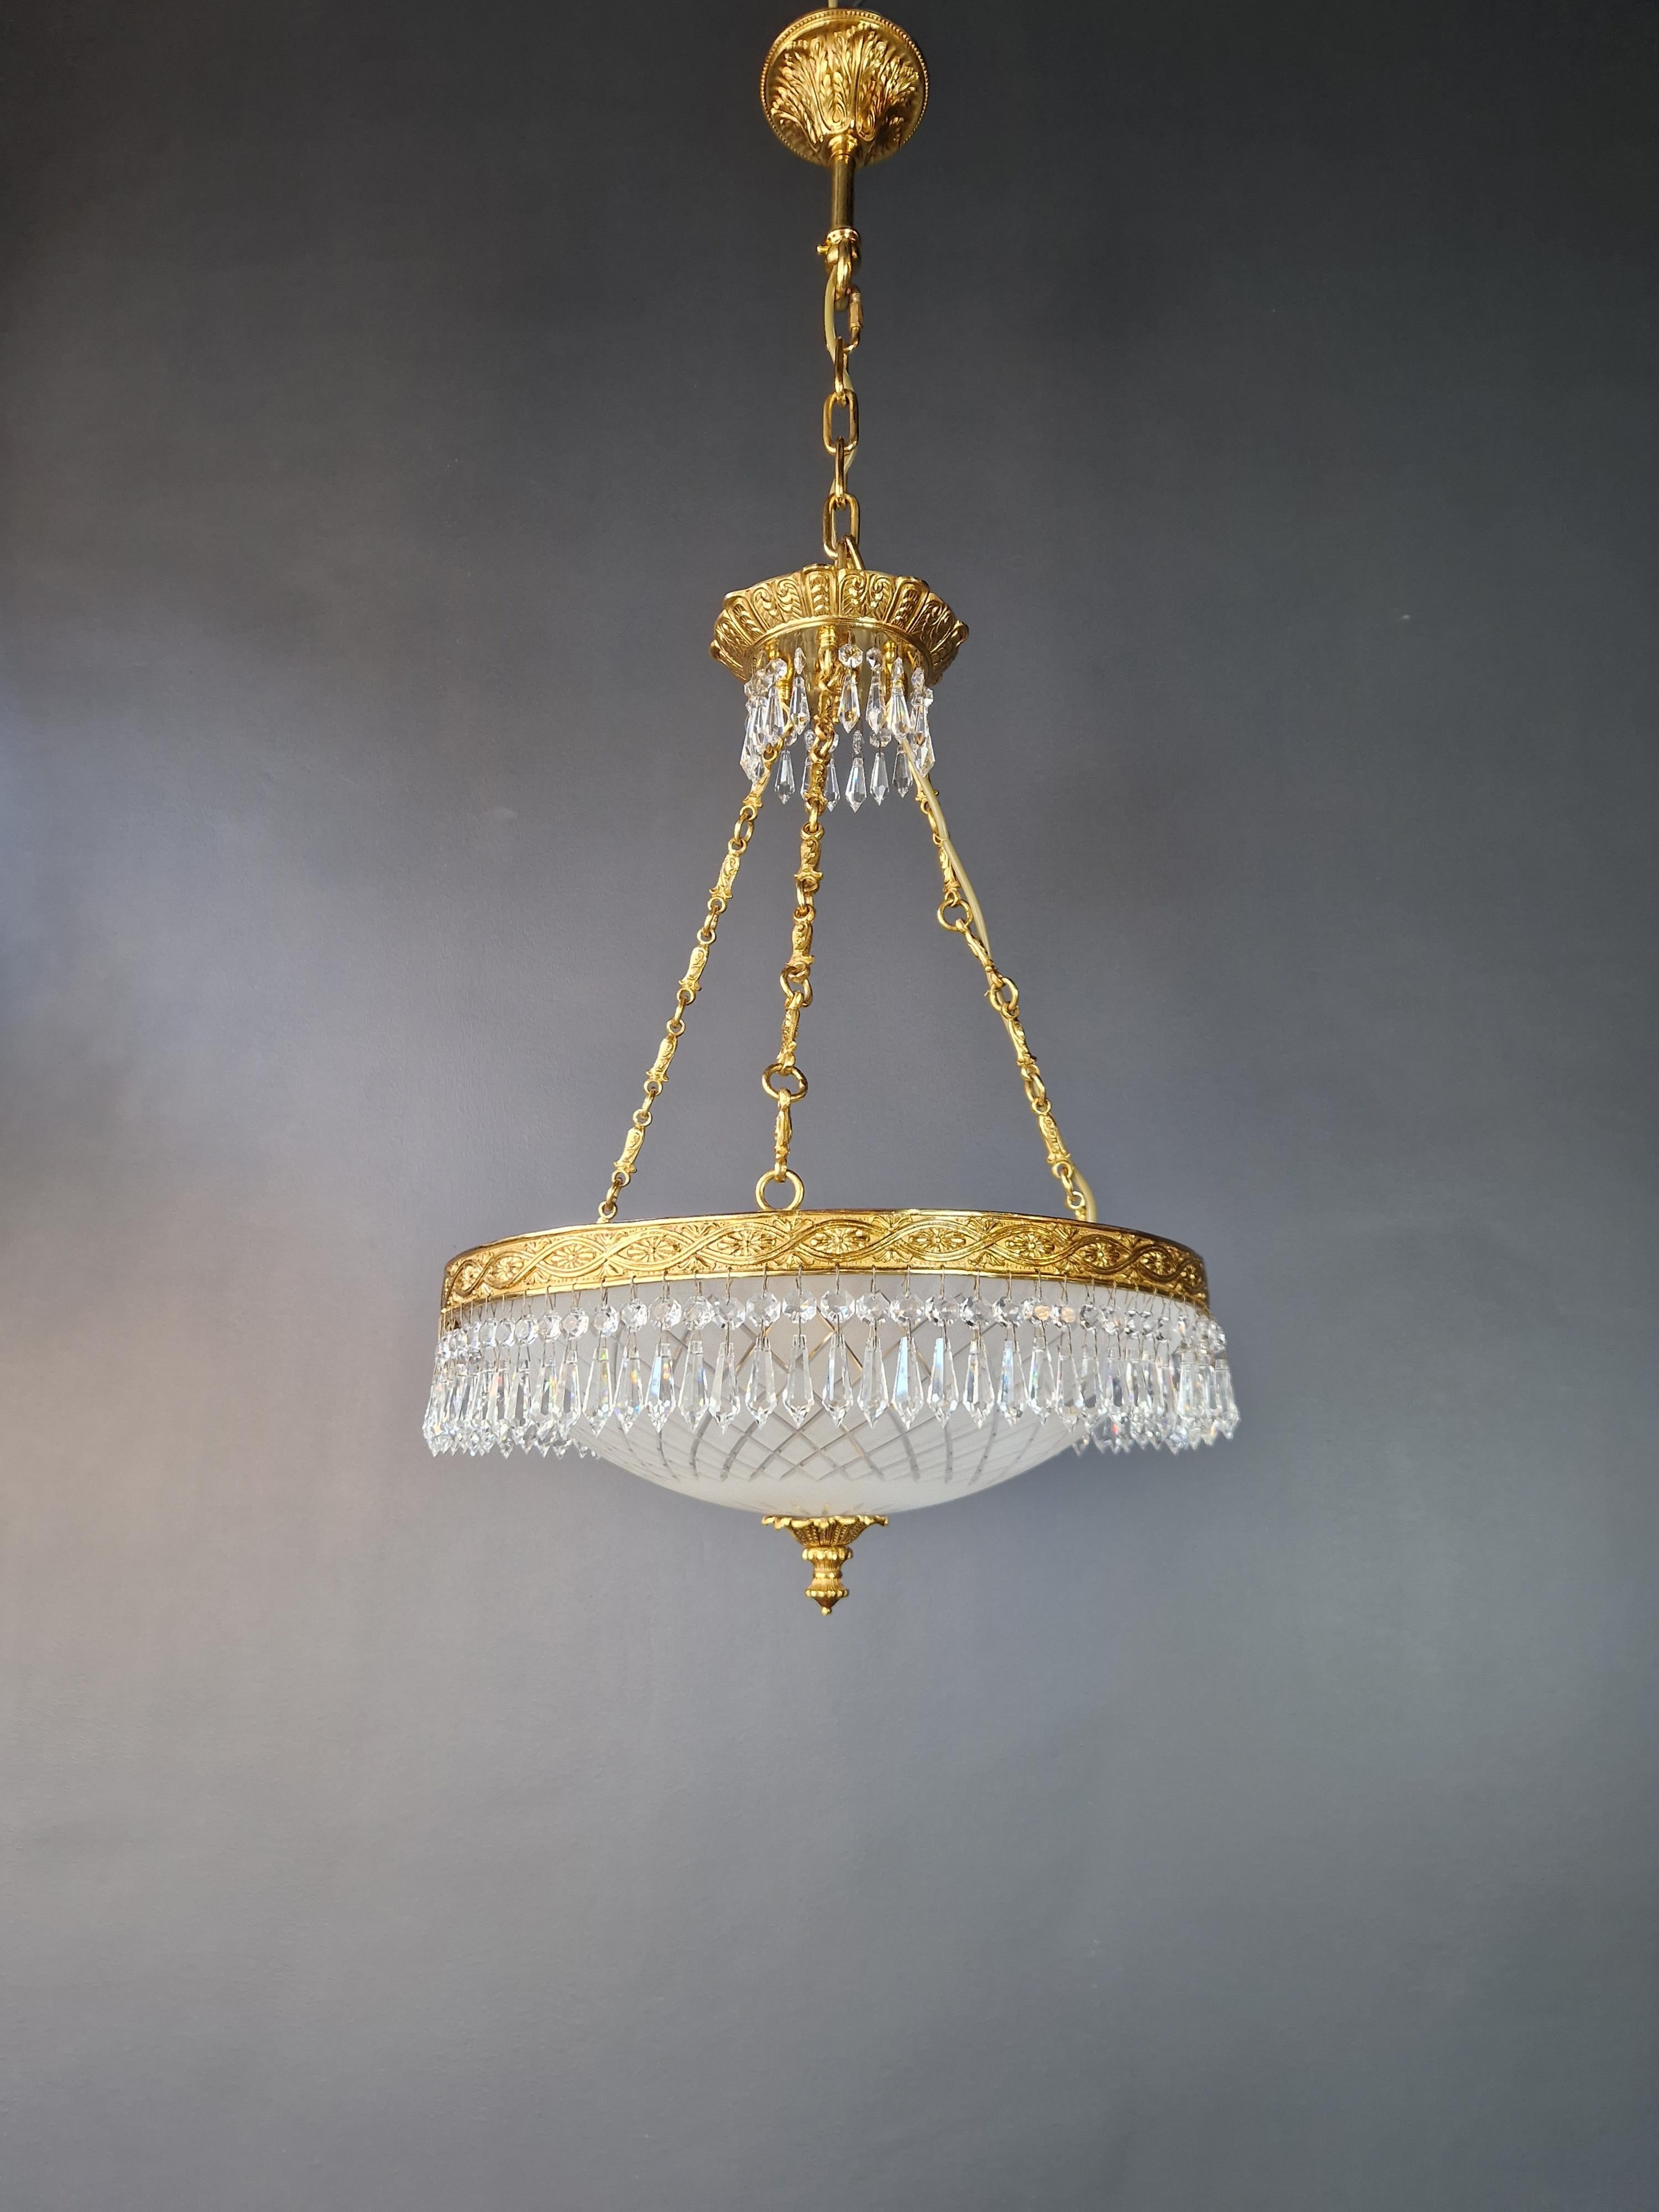 The crystals are expertly hand-knotted, adding a touch of elegance and sophistication to this timeless piece. This is a new reproduction, and several are available, ensuring you can bring this classic beauty to your space.

Measuring a total height